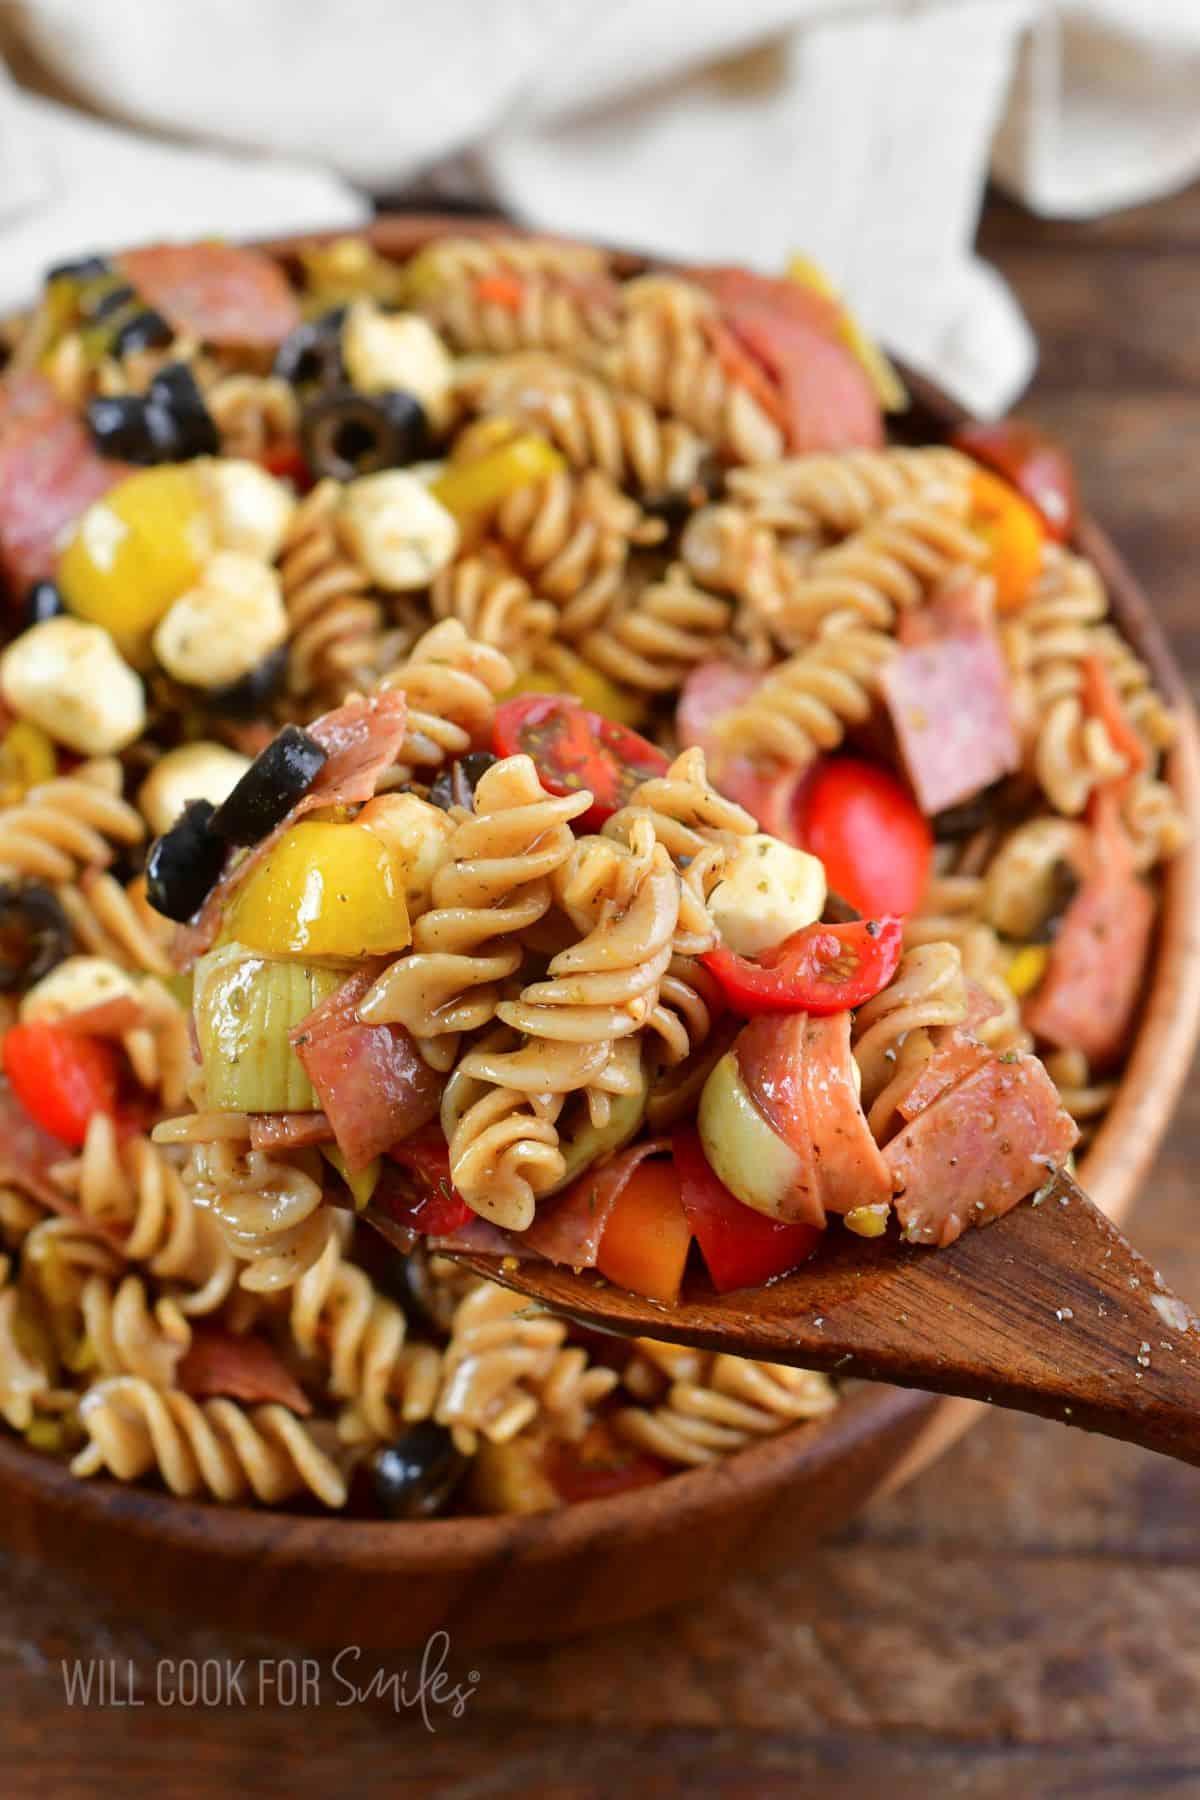 some antipasto pasta salad on the wooden spoon next to the bowl.